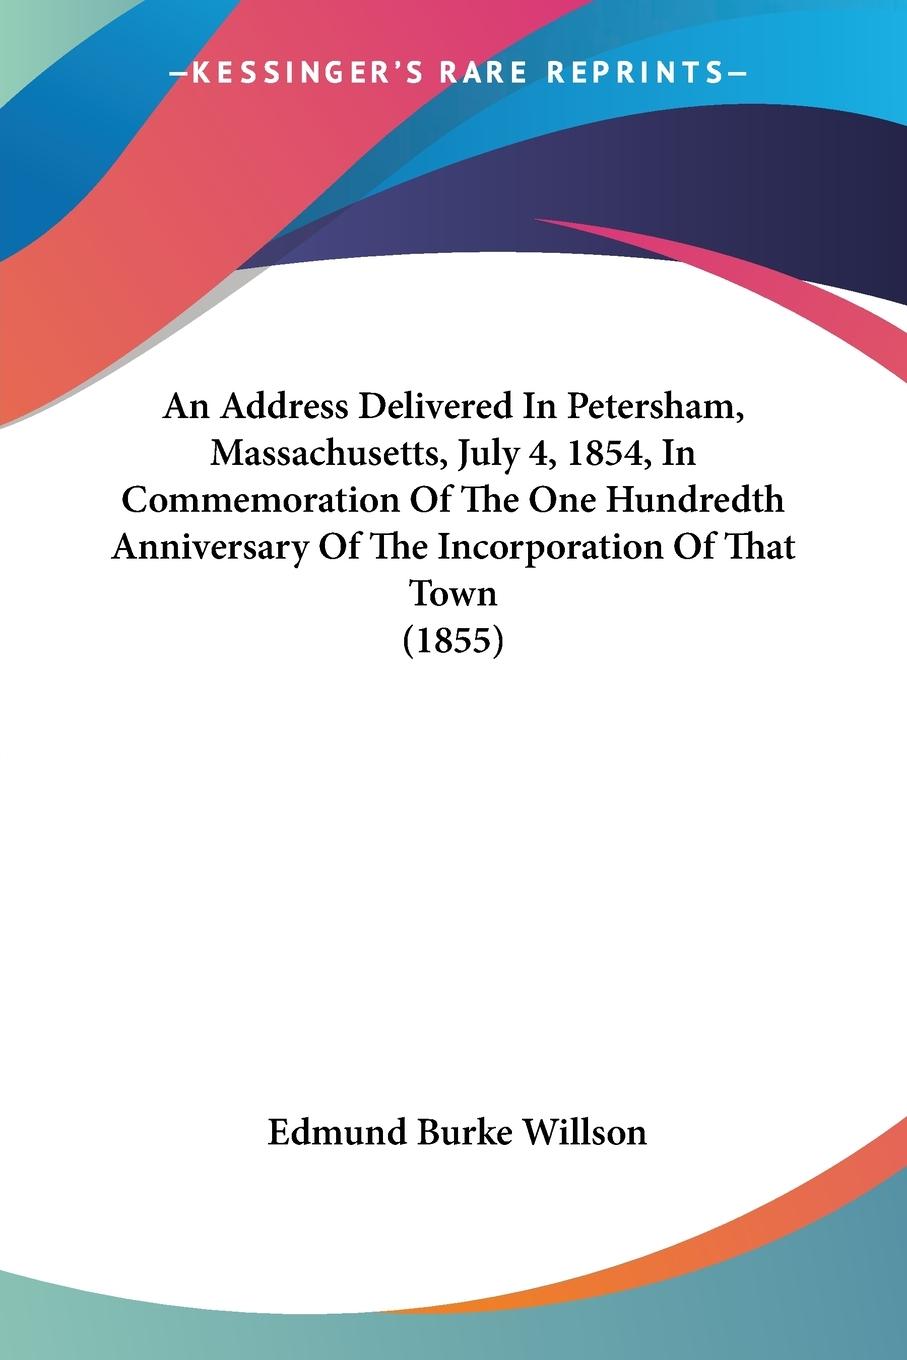 An Address Delivered In Petersham, Massachusetts, July 4, 1854, In Commemoration Of The One Hundredth Anniversary Of The Incorporation Of That Town (1855) - Willson, Edmund Burke